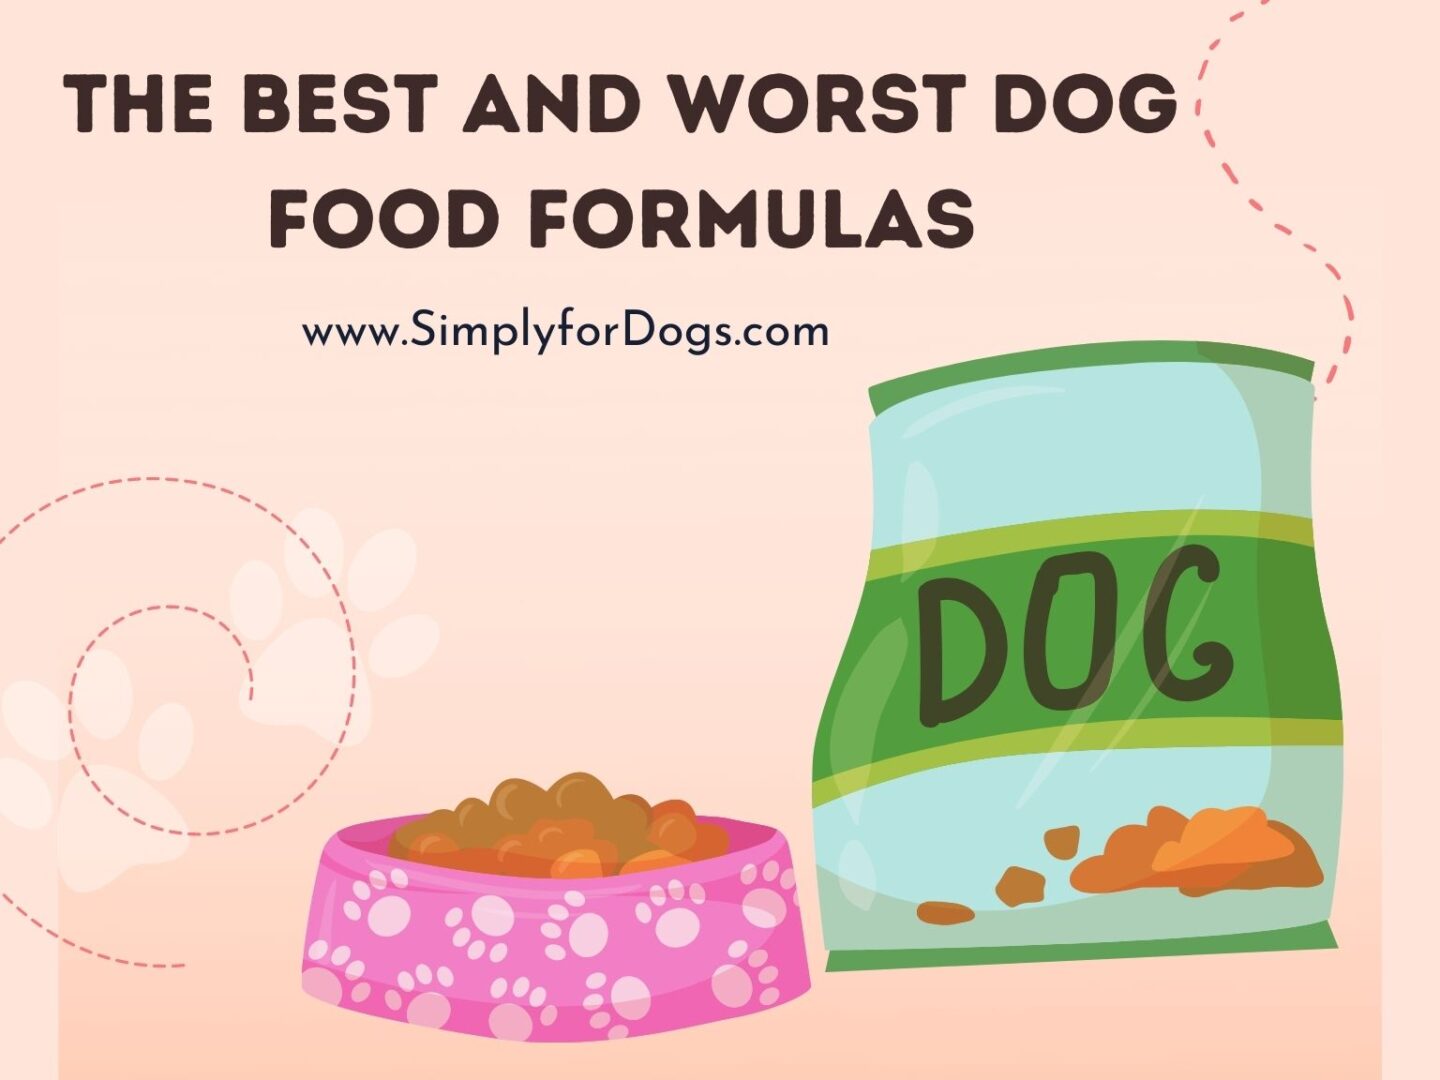 The Best and Worst Dog Food Formulas